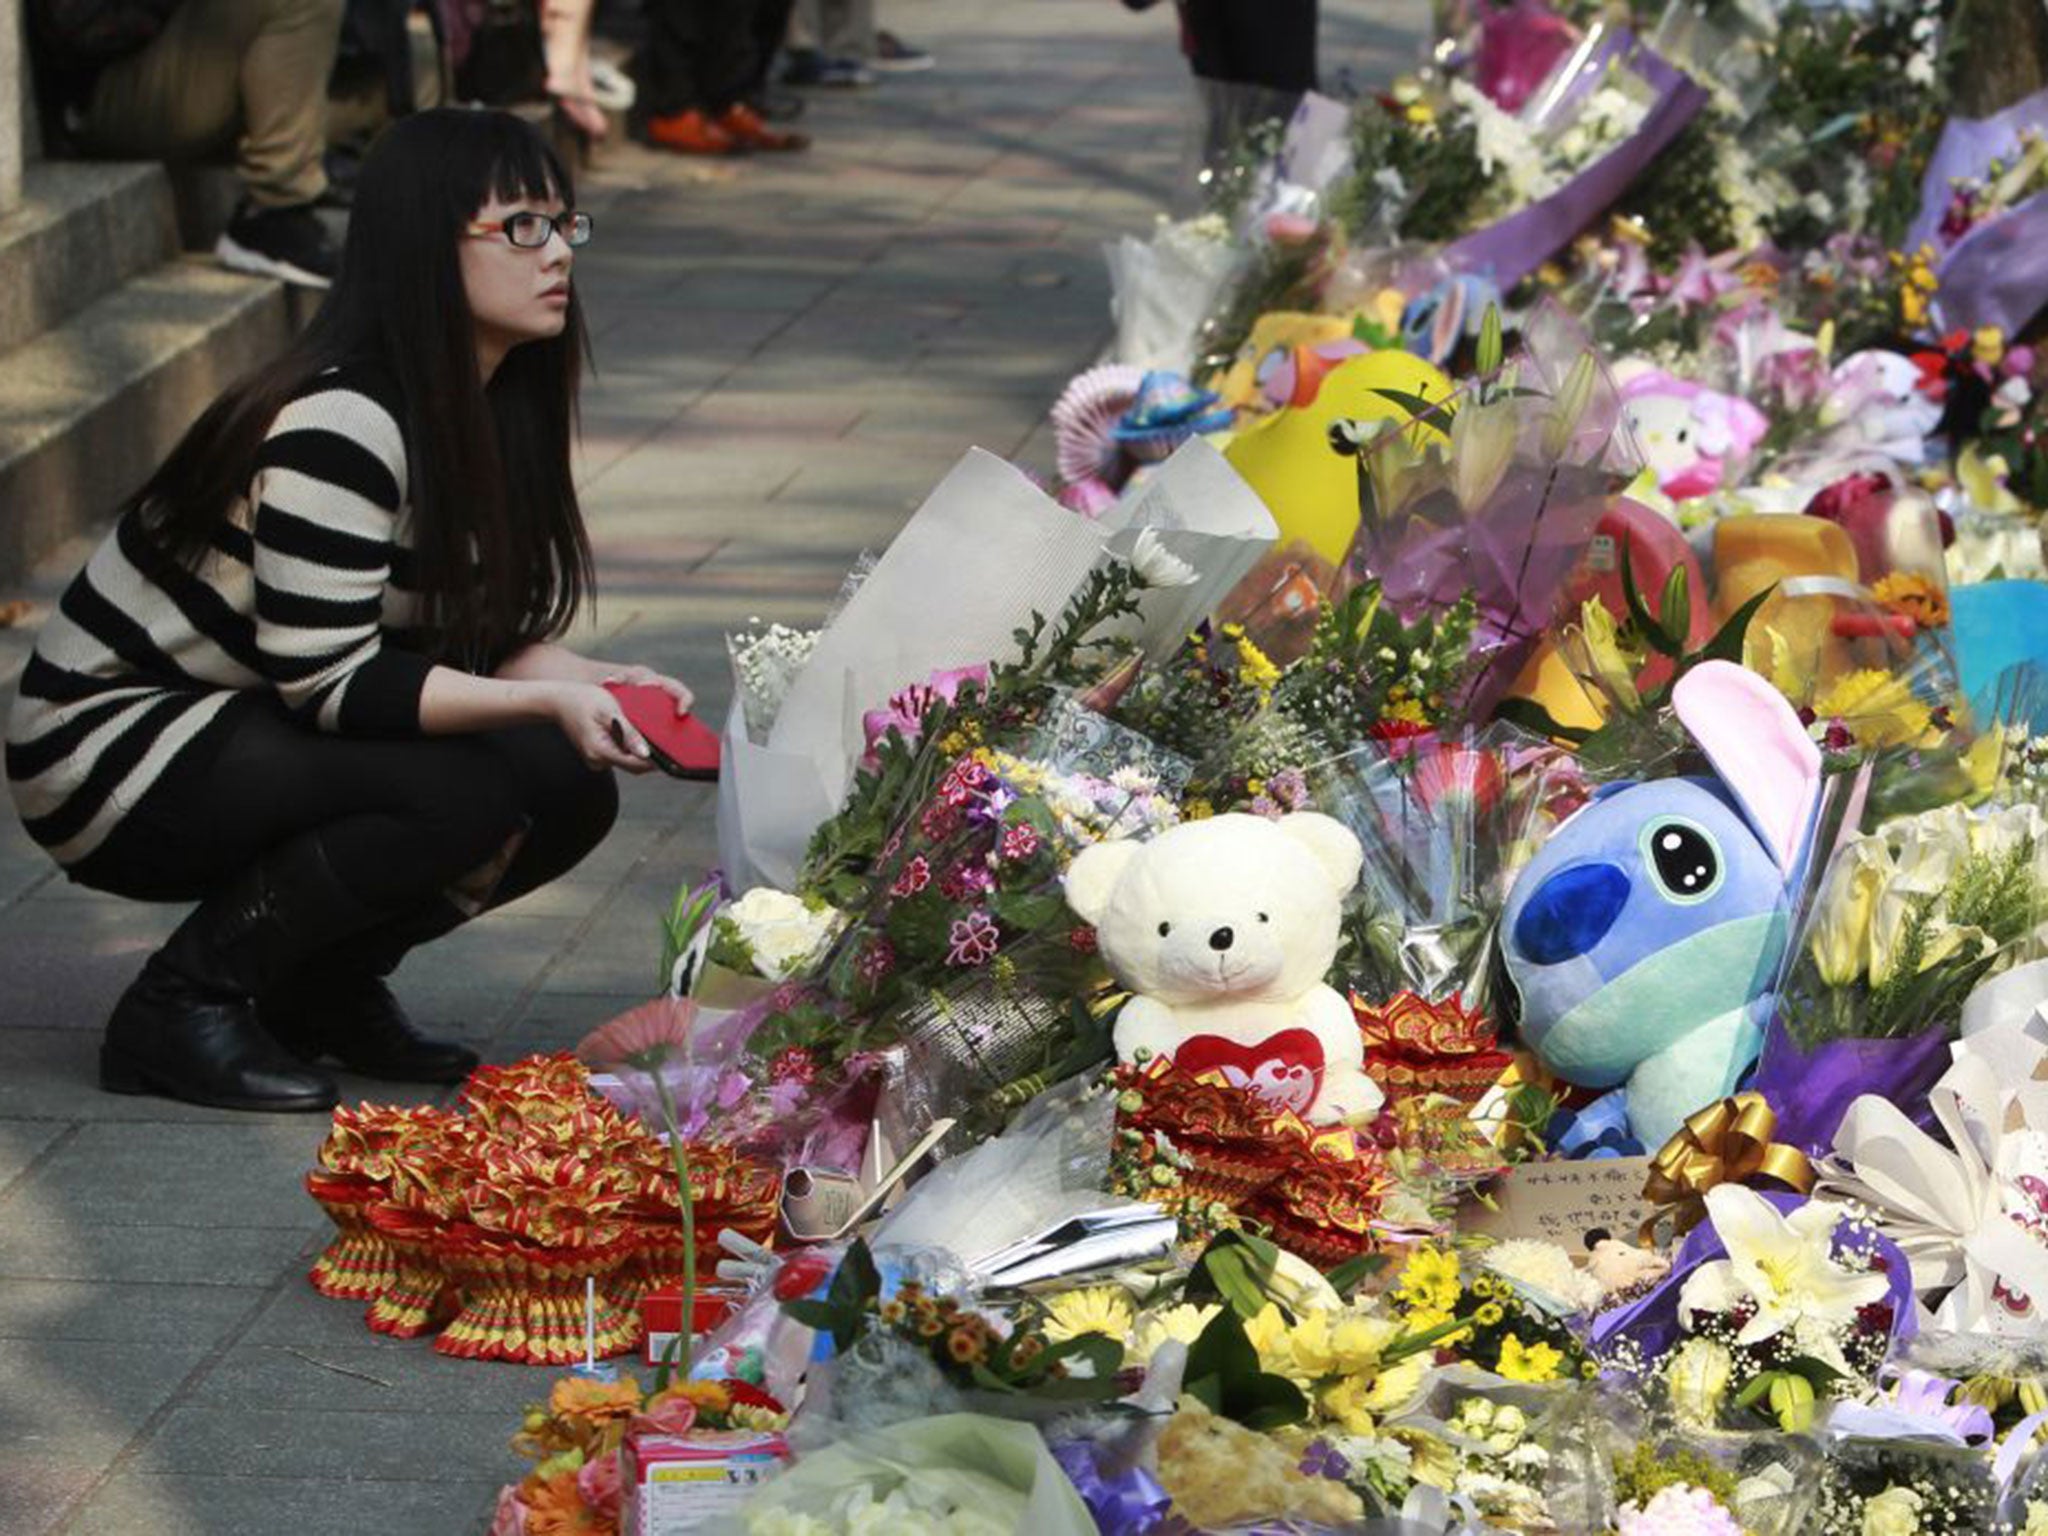 A shrine for the young girl who was also a victim of a knife attack